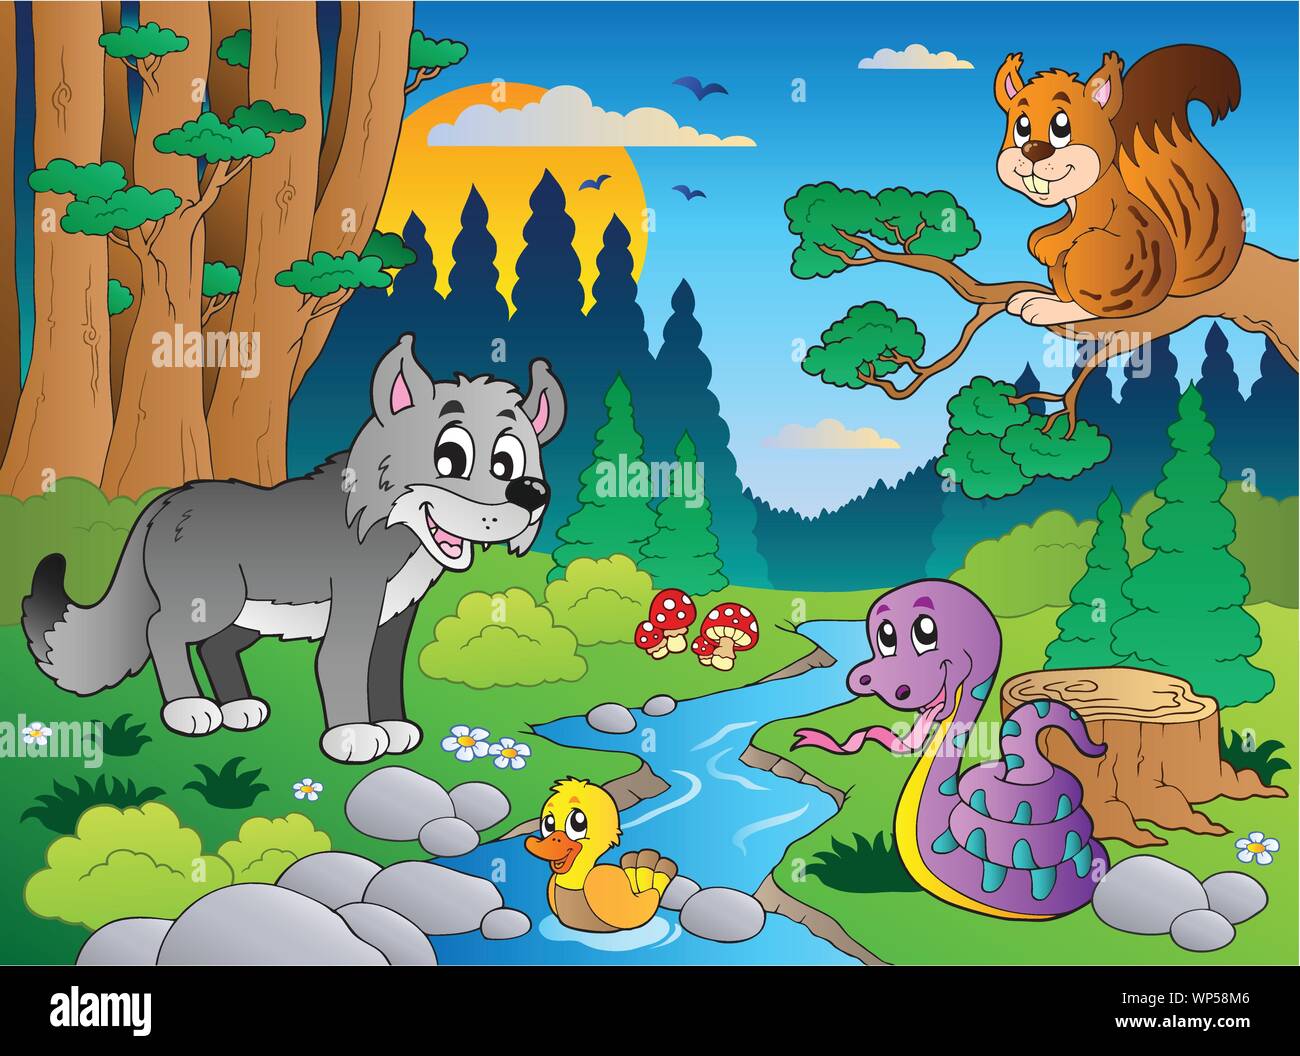 Forest scene with various animals 5 Stock Vector